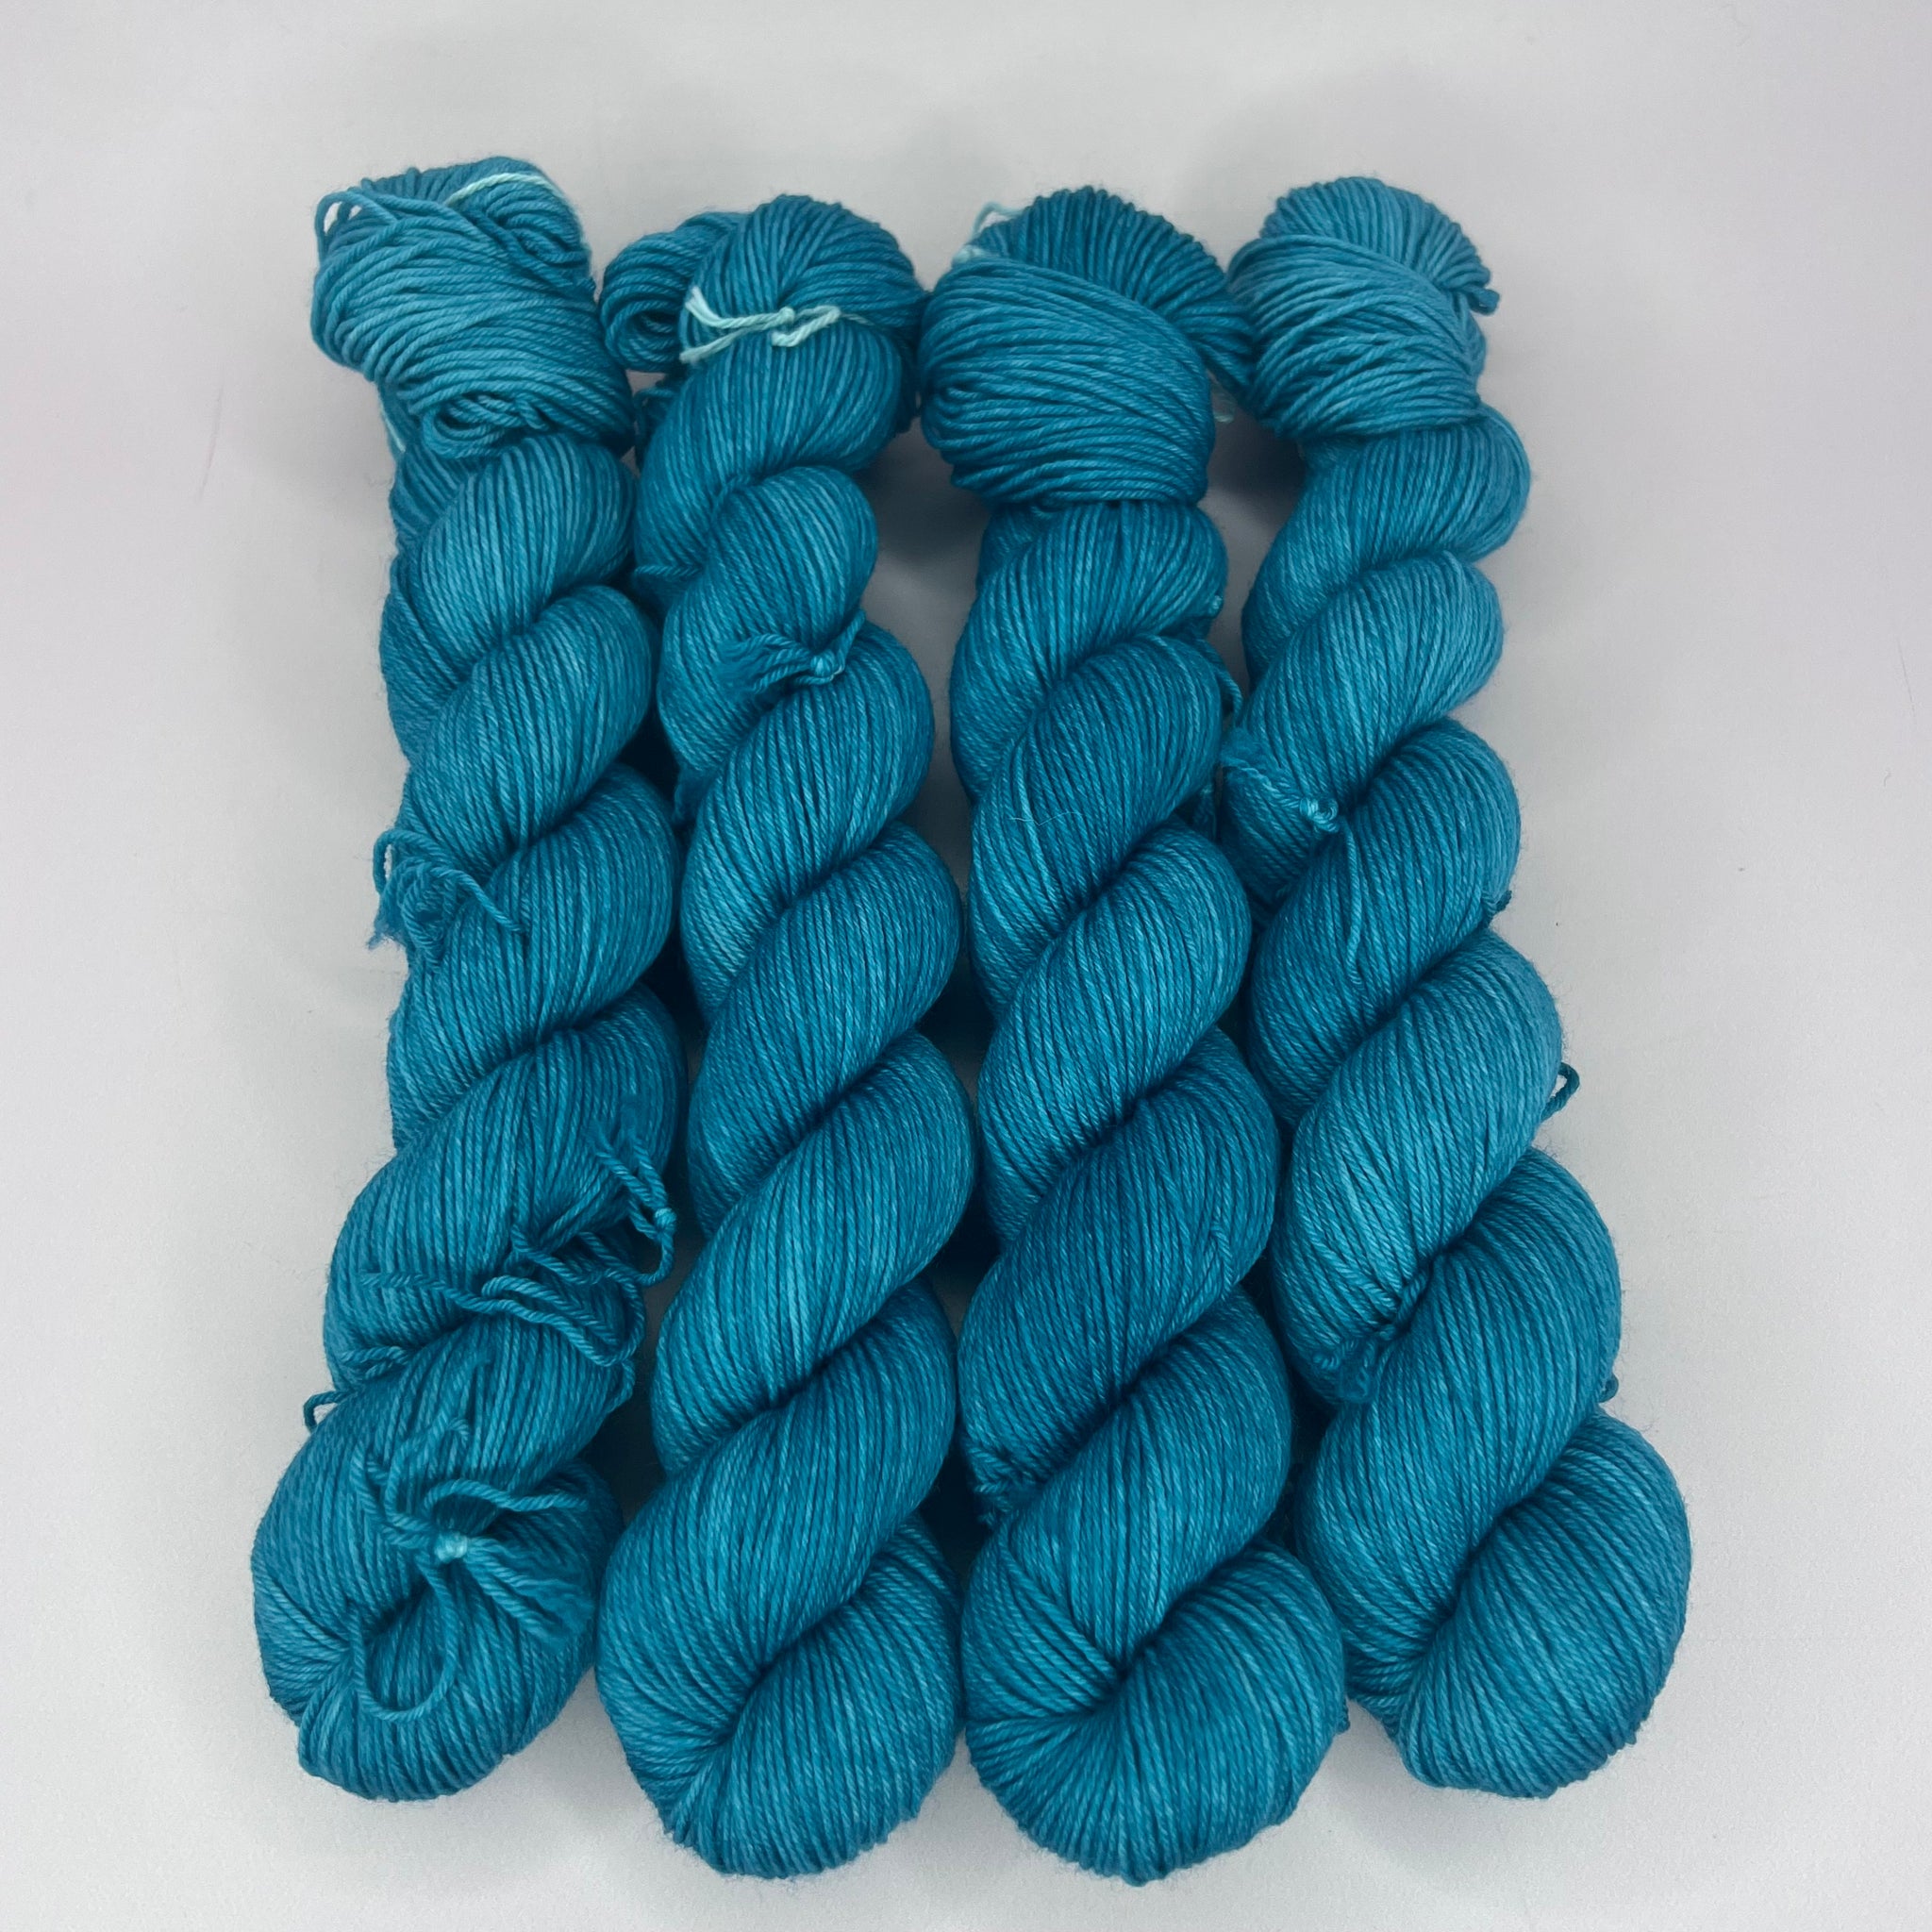 Jimmy Sock- 50g Mini Skein - Teal Me About It